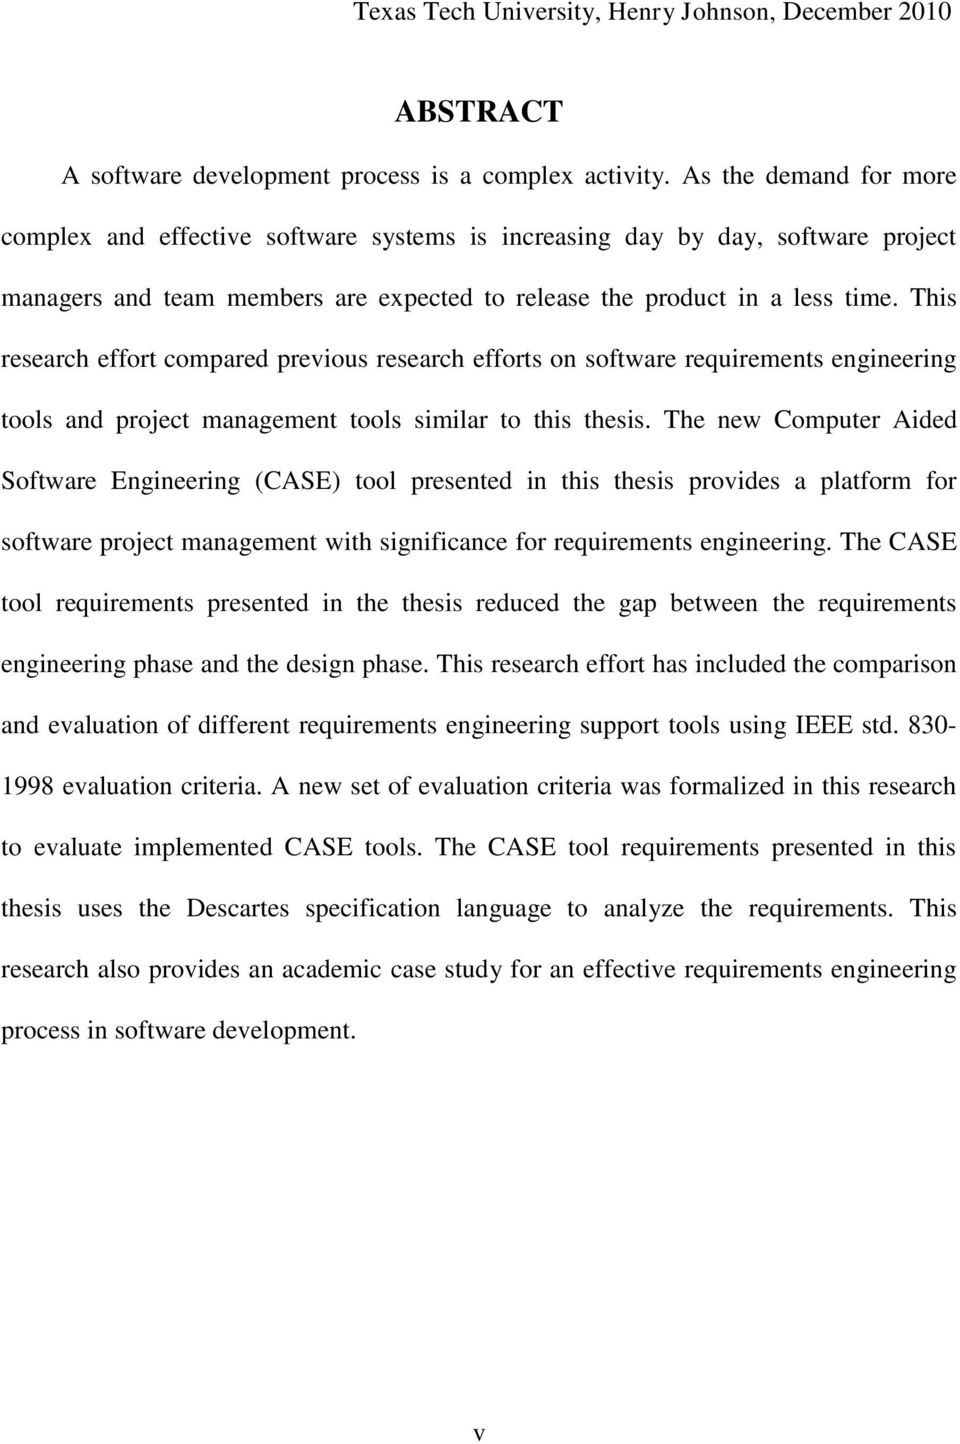 This research effort compared previous research efforts on software requirements engineering tools and project management tools similar to this thesis.